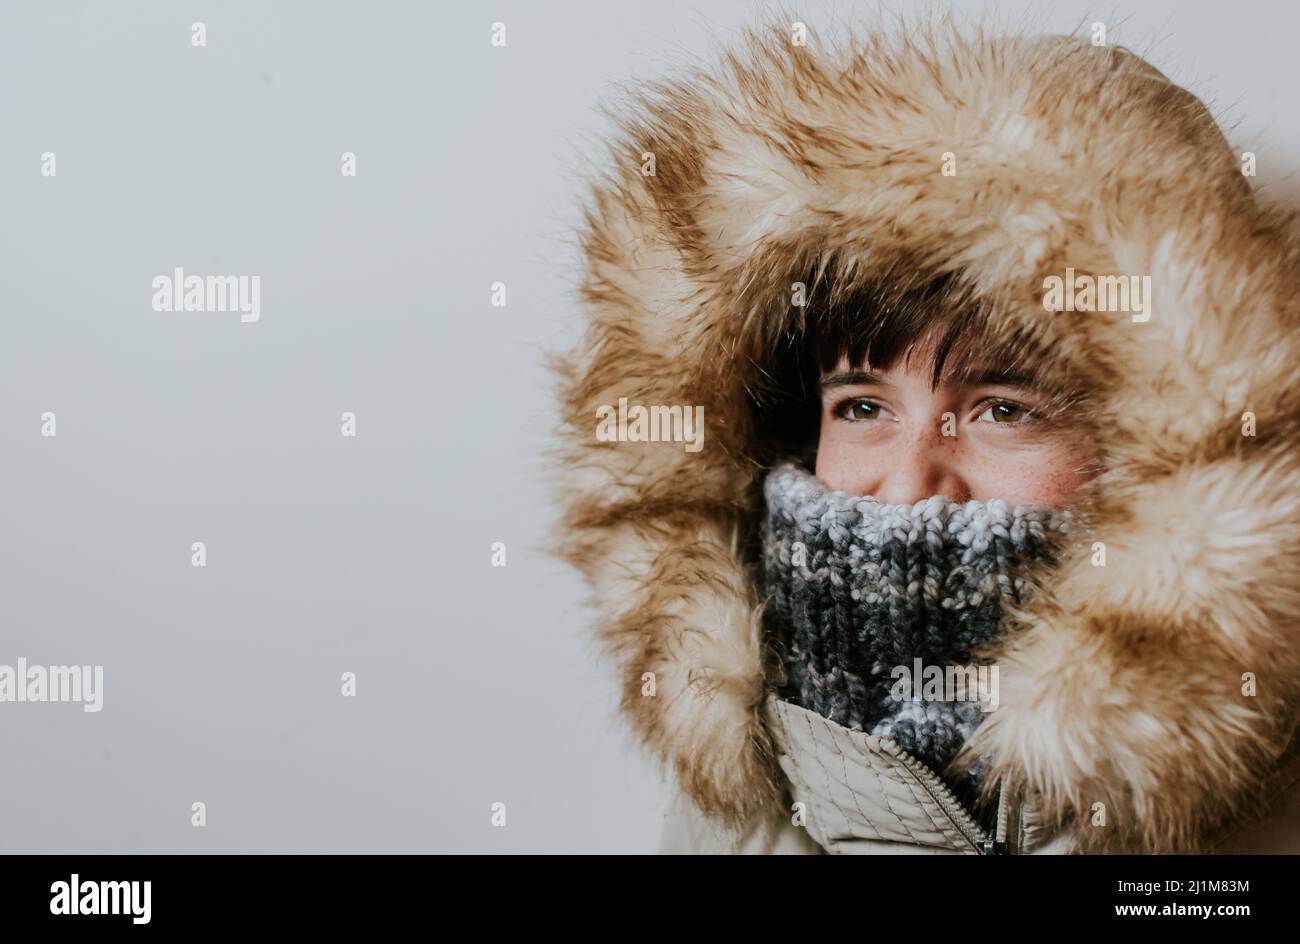 Boy wearing winter coat with furry hood against white background. Stock Photo